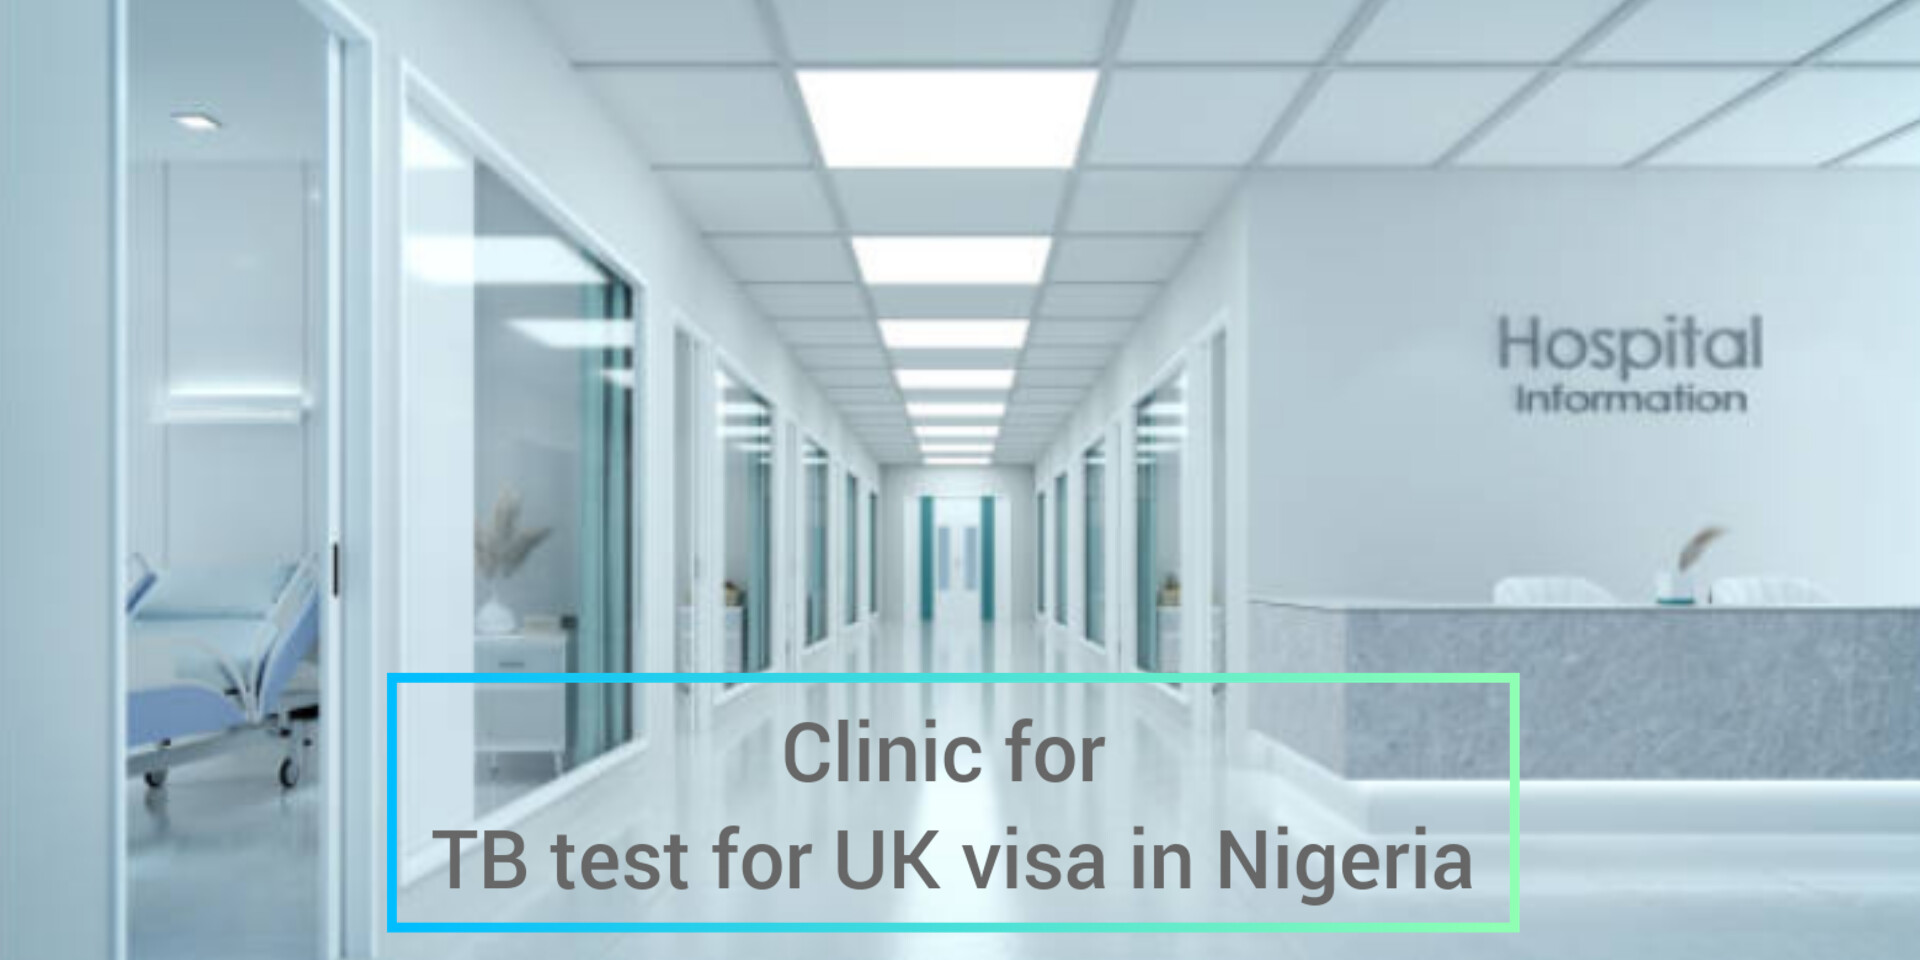 this is an image of clinic where tb test is done for uk visa in nigeria